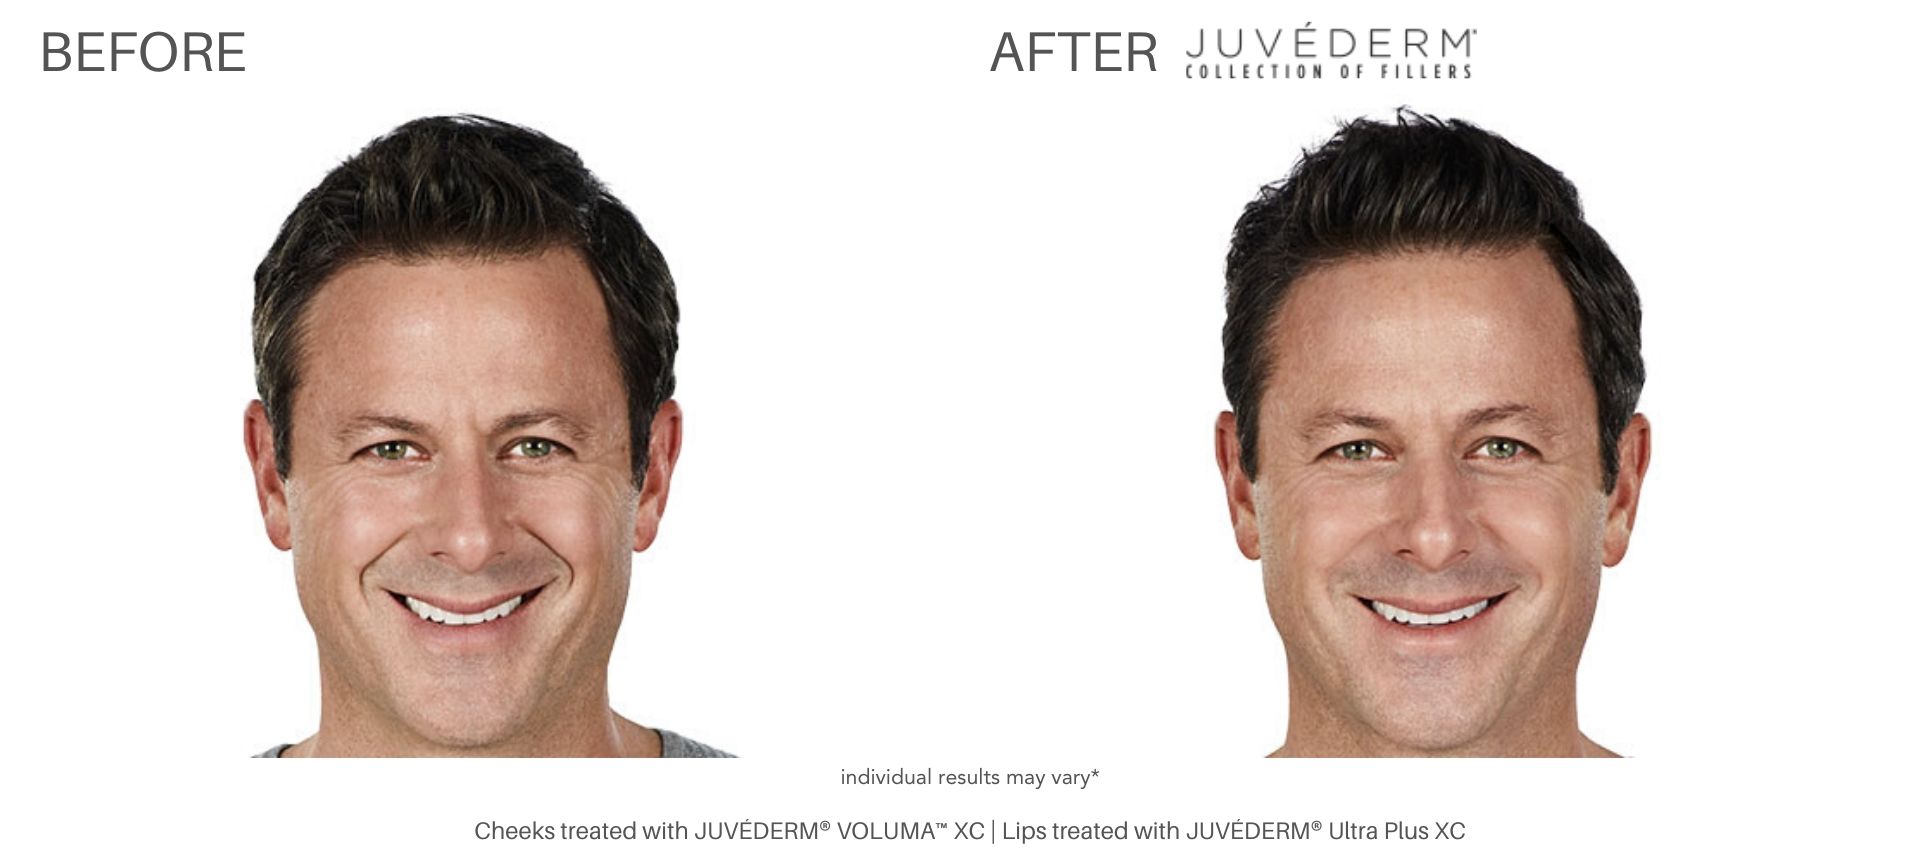 Juvederm Dernmal Fillers before and after Numa Spa in Newport News, VA